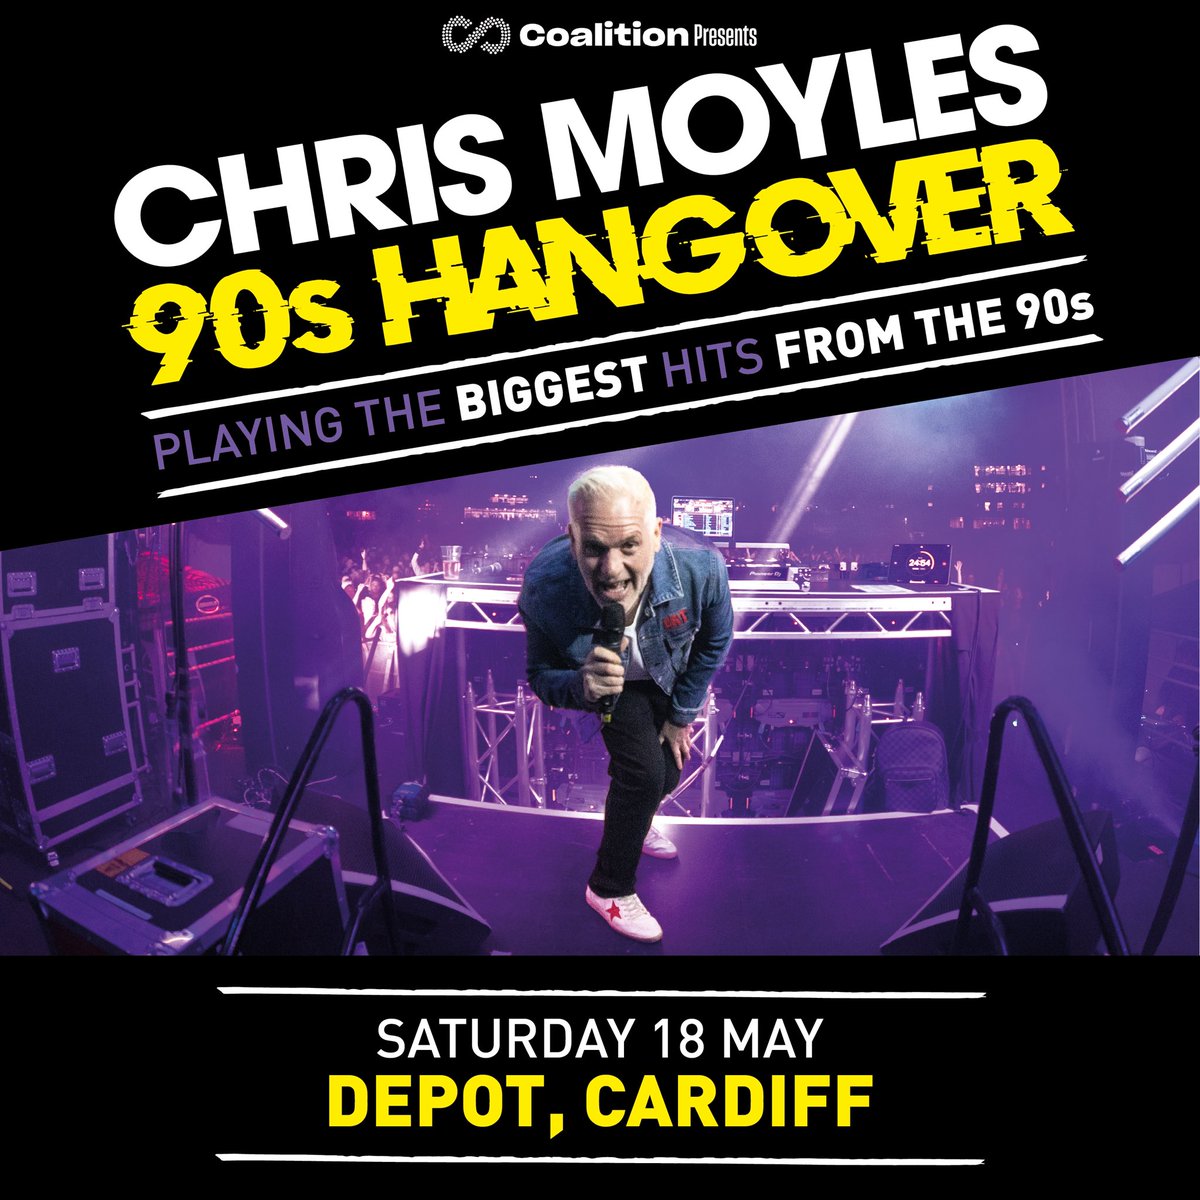 𝐂𝐇𝐑𝐈𝐒 𝐌𝐎𝐘𝐋𝐄𝐒 𝟗𝟎𝐒 𝐇𝐀𝐍𝐆𝐎𝐕𝐄𝐑 🪩 One of the most prolific names in broadcasting of this century, Chris Moyles, brings you 90s Hangover! Playing the biggest tunes from the 90s, from Blur to Britney, Pulp to Prodigy and everything in between. On sale Mon, 10am!